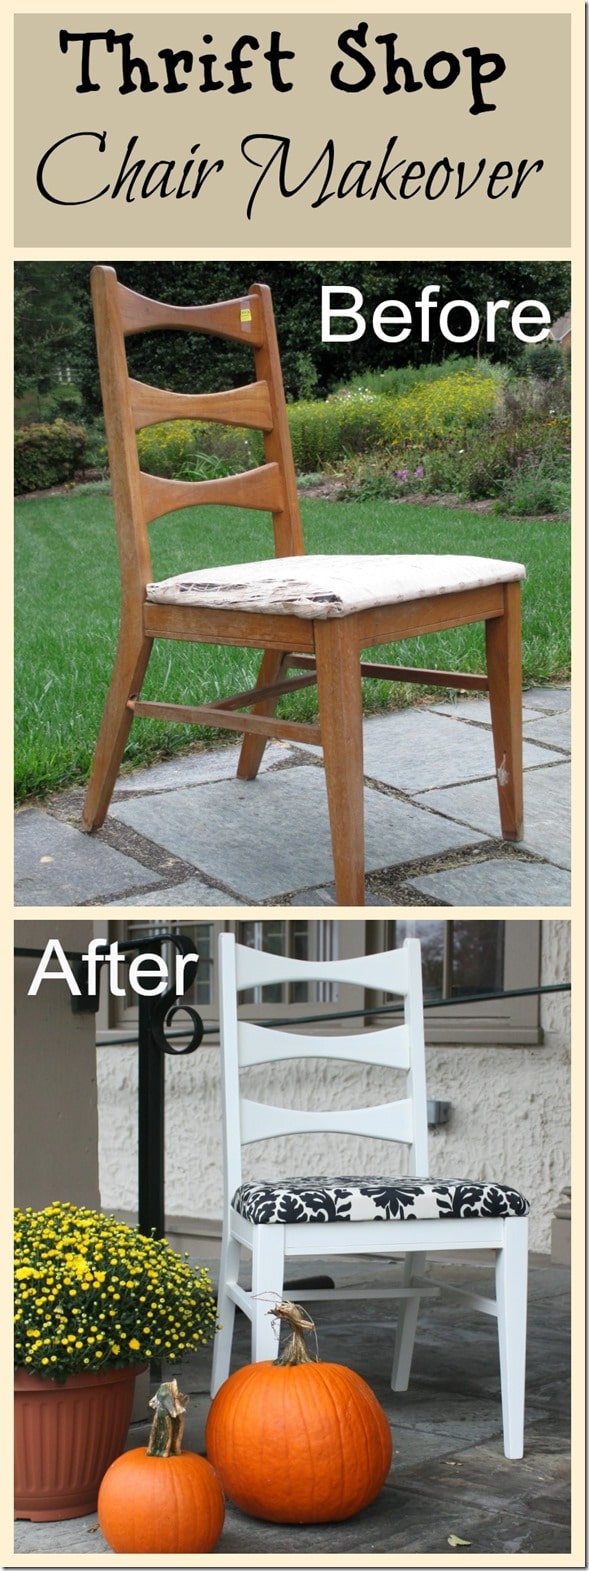 Thrift Shop Chair Makeover by virginiasweetpea.com